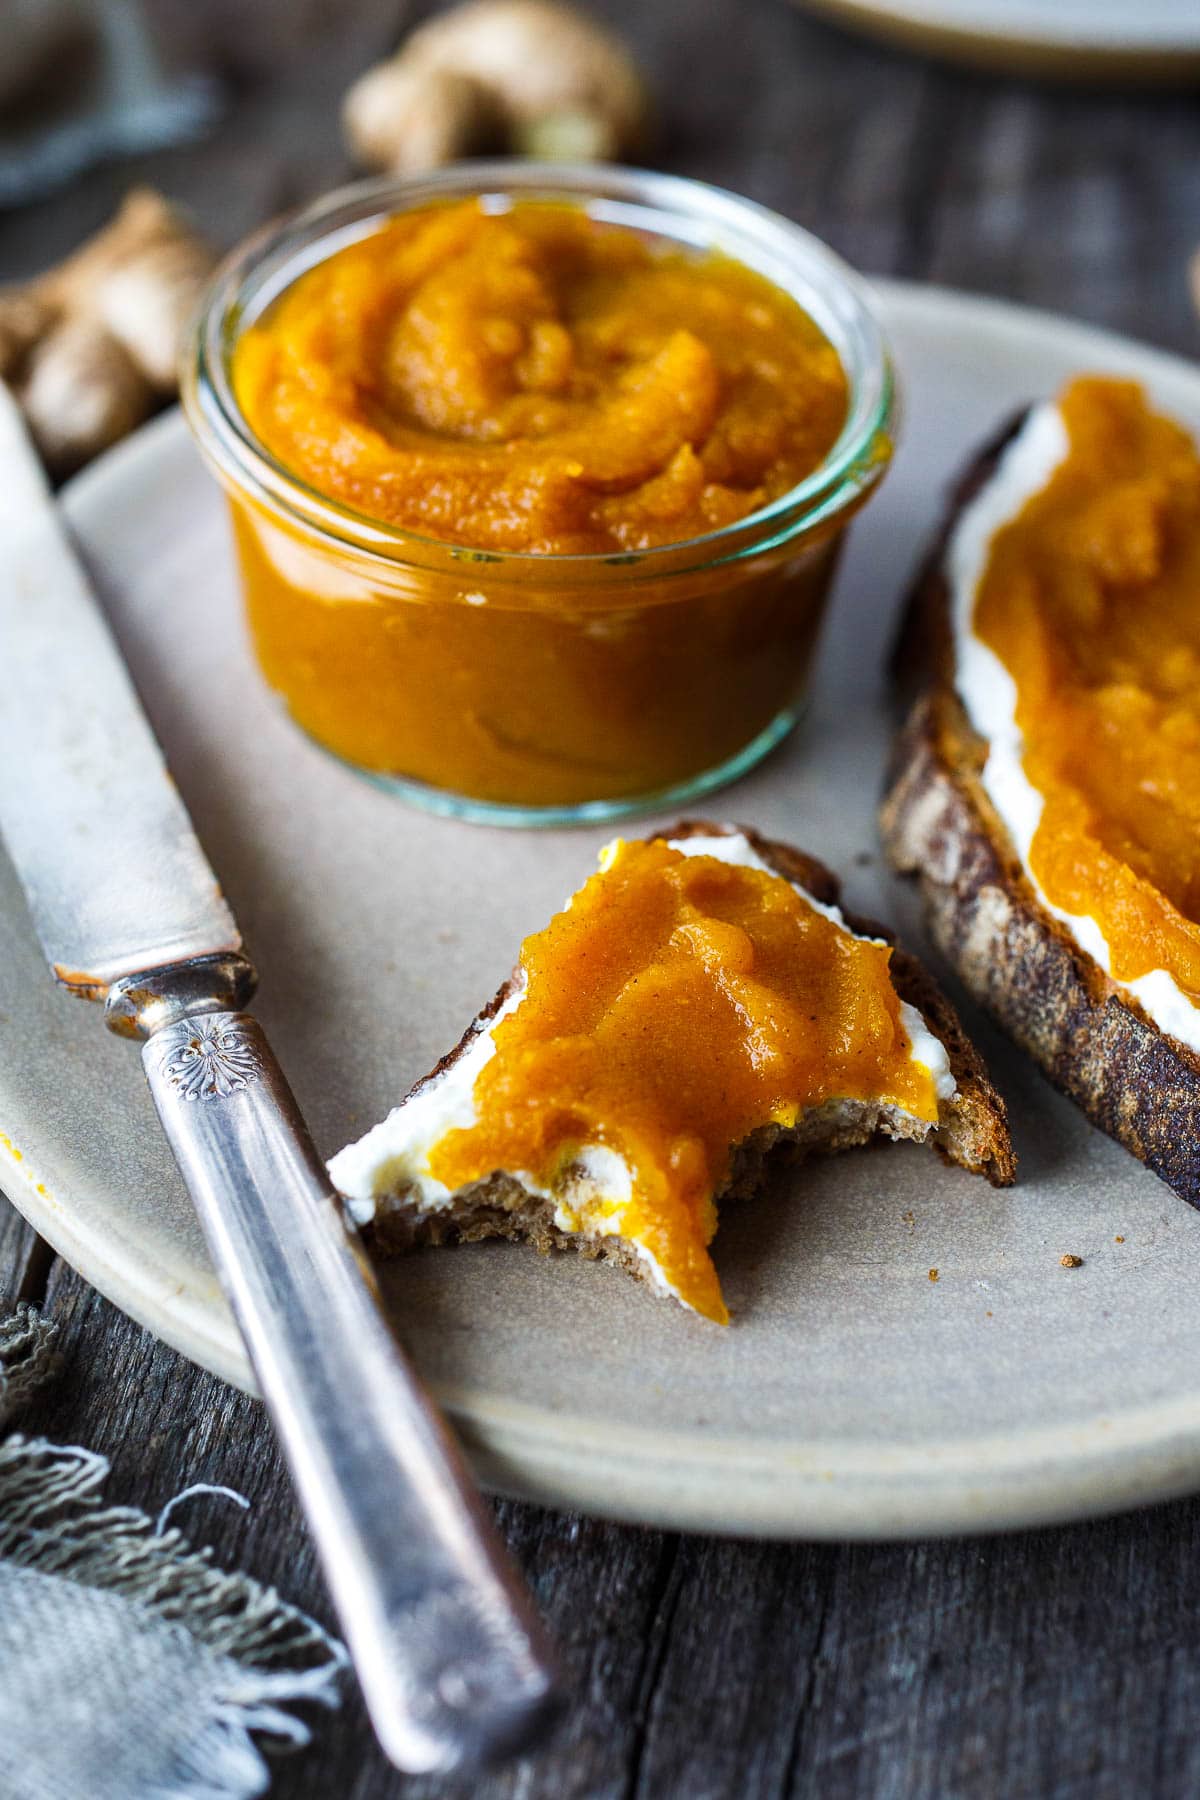 Homemade Pumpkin Butter made from scratch with fresh pumpkin - simple, healthy and delicious with many ways to use it! Vegan. 